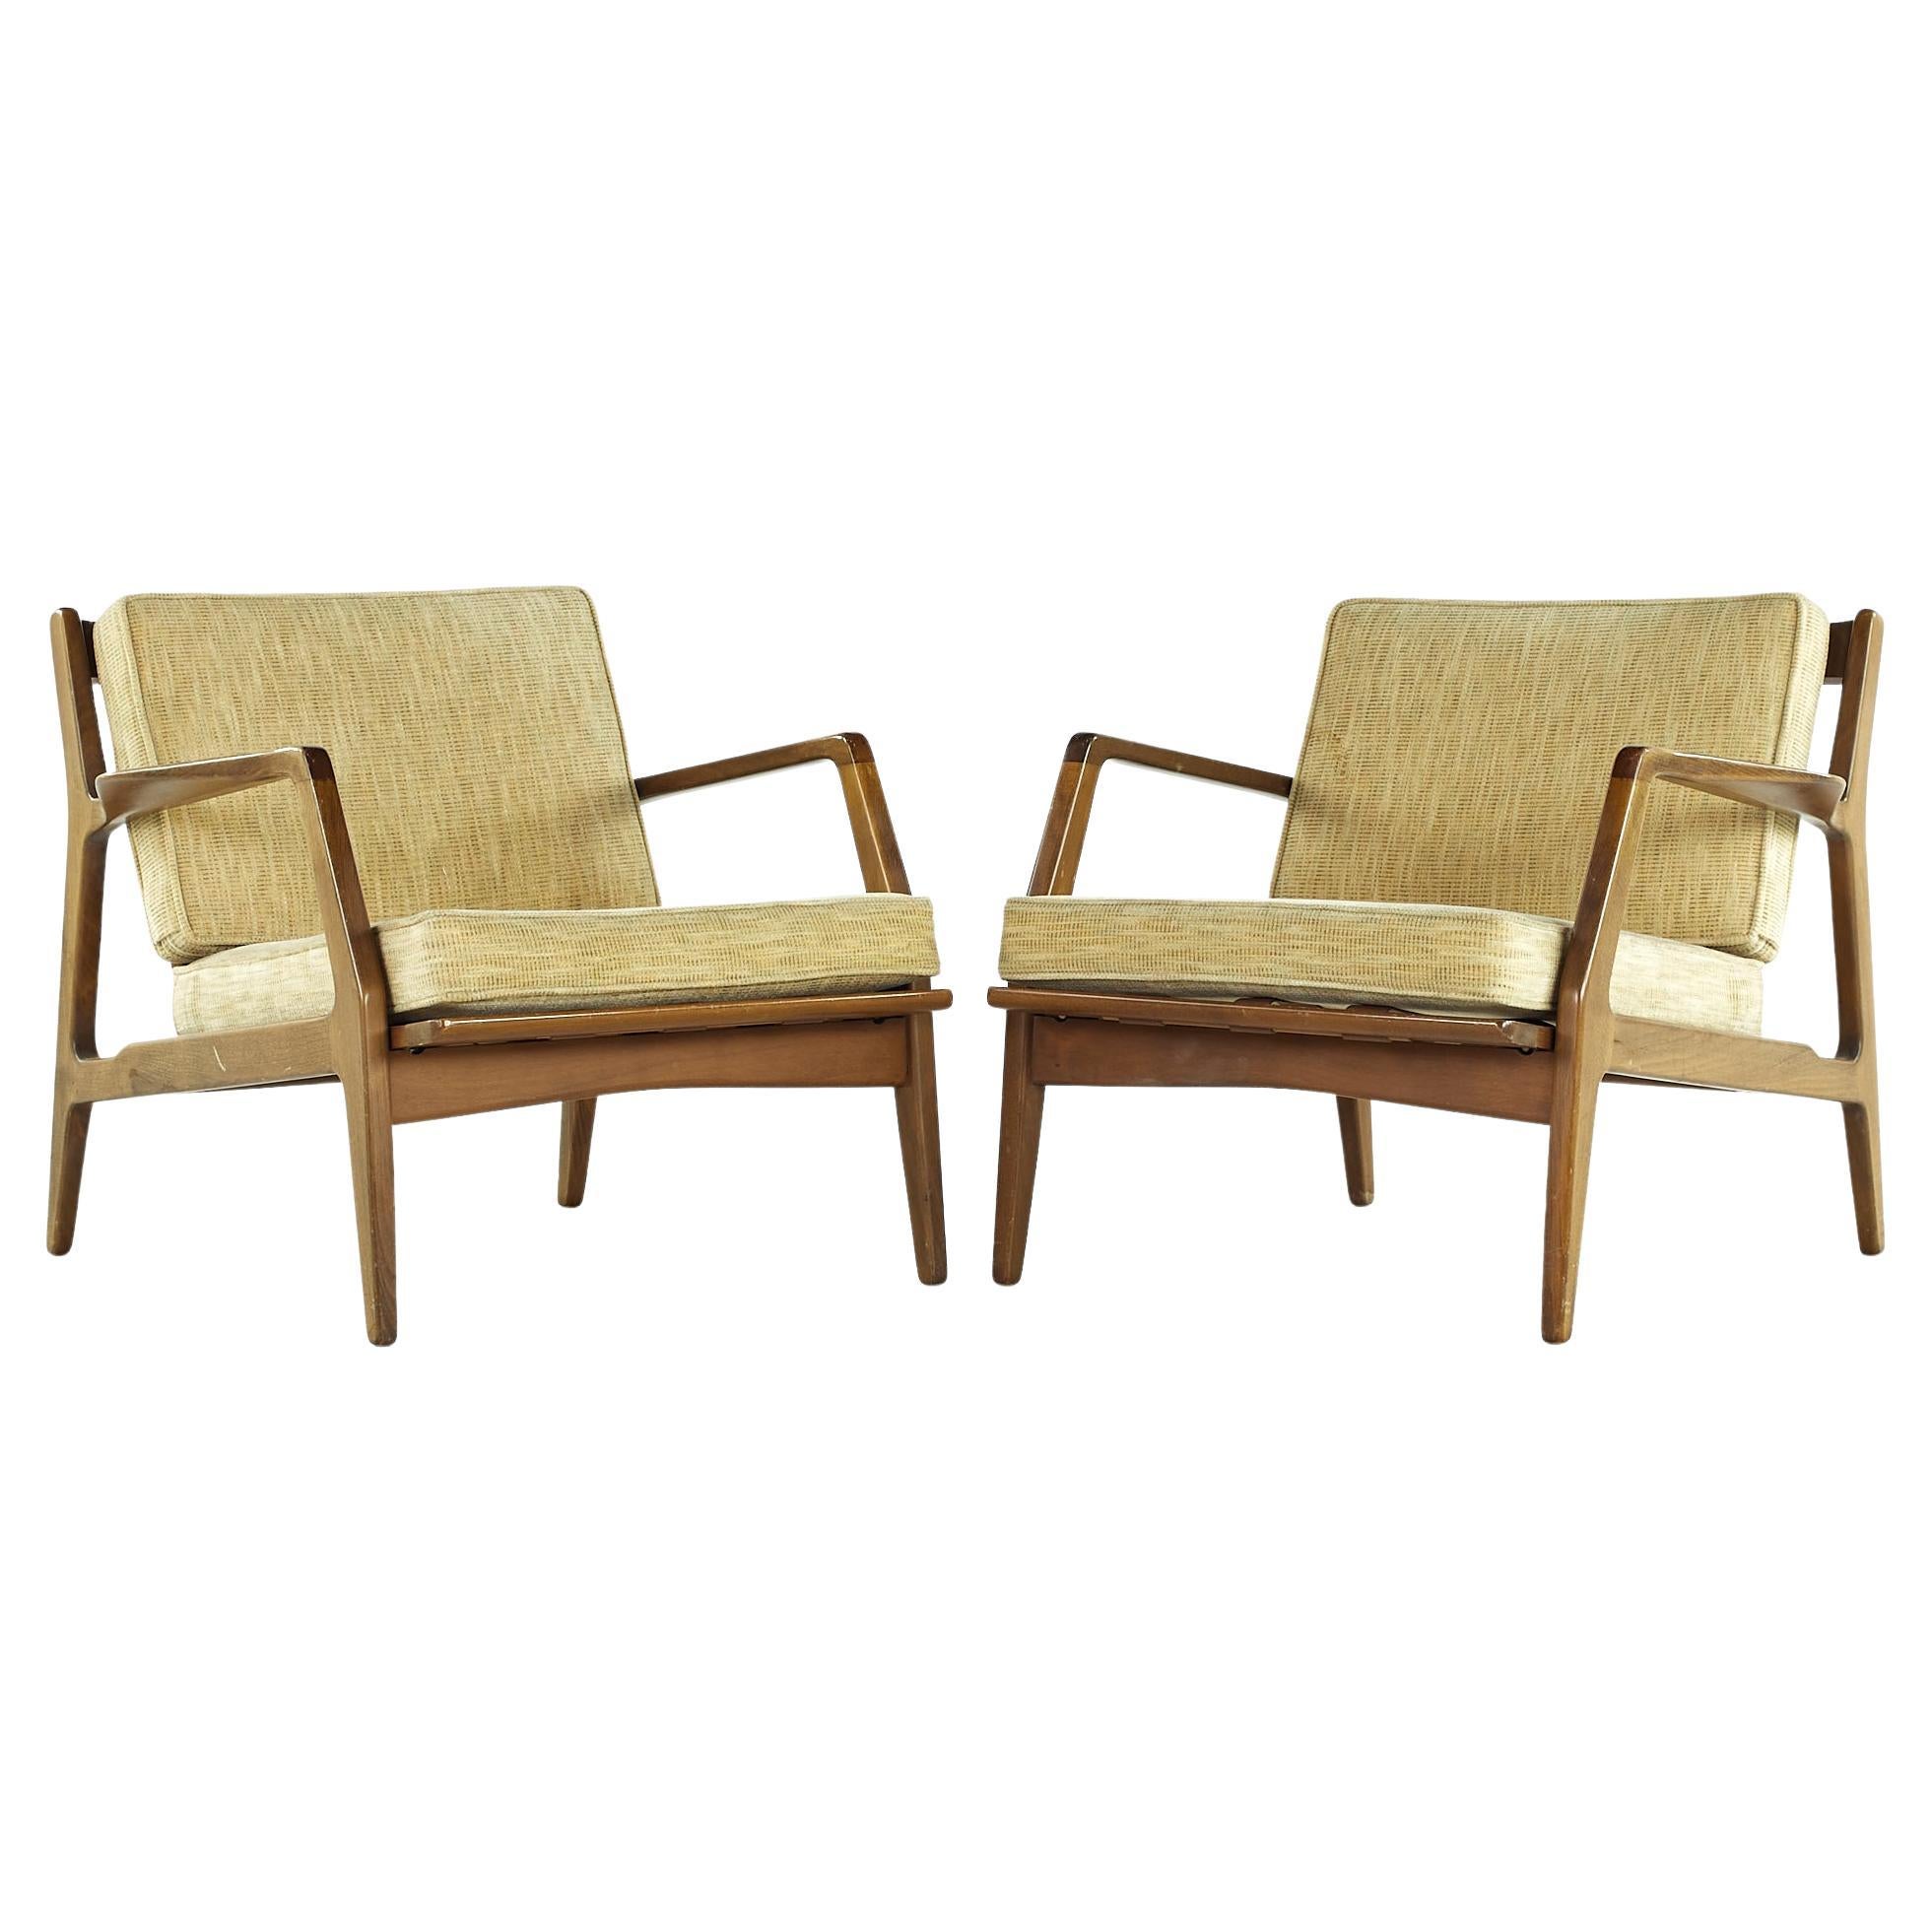 SOLD 05/14/24 Lawrence Peabody Midcentury Walnut Lounge Chairs, Pair